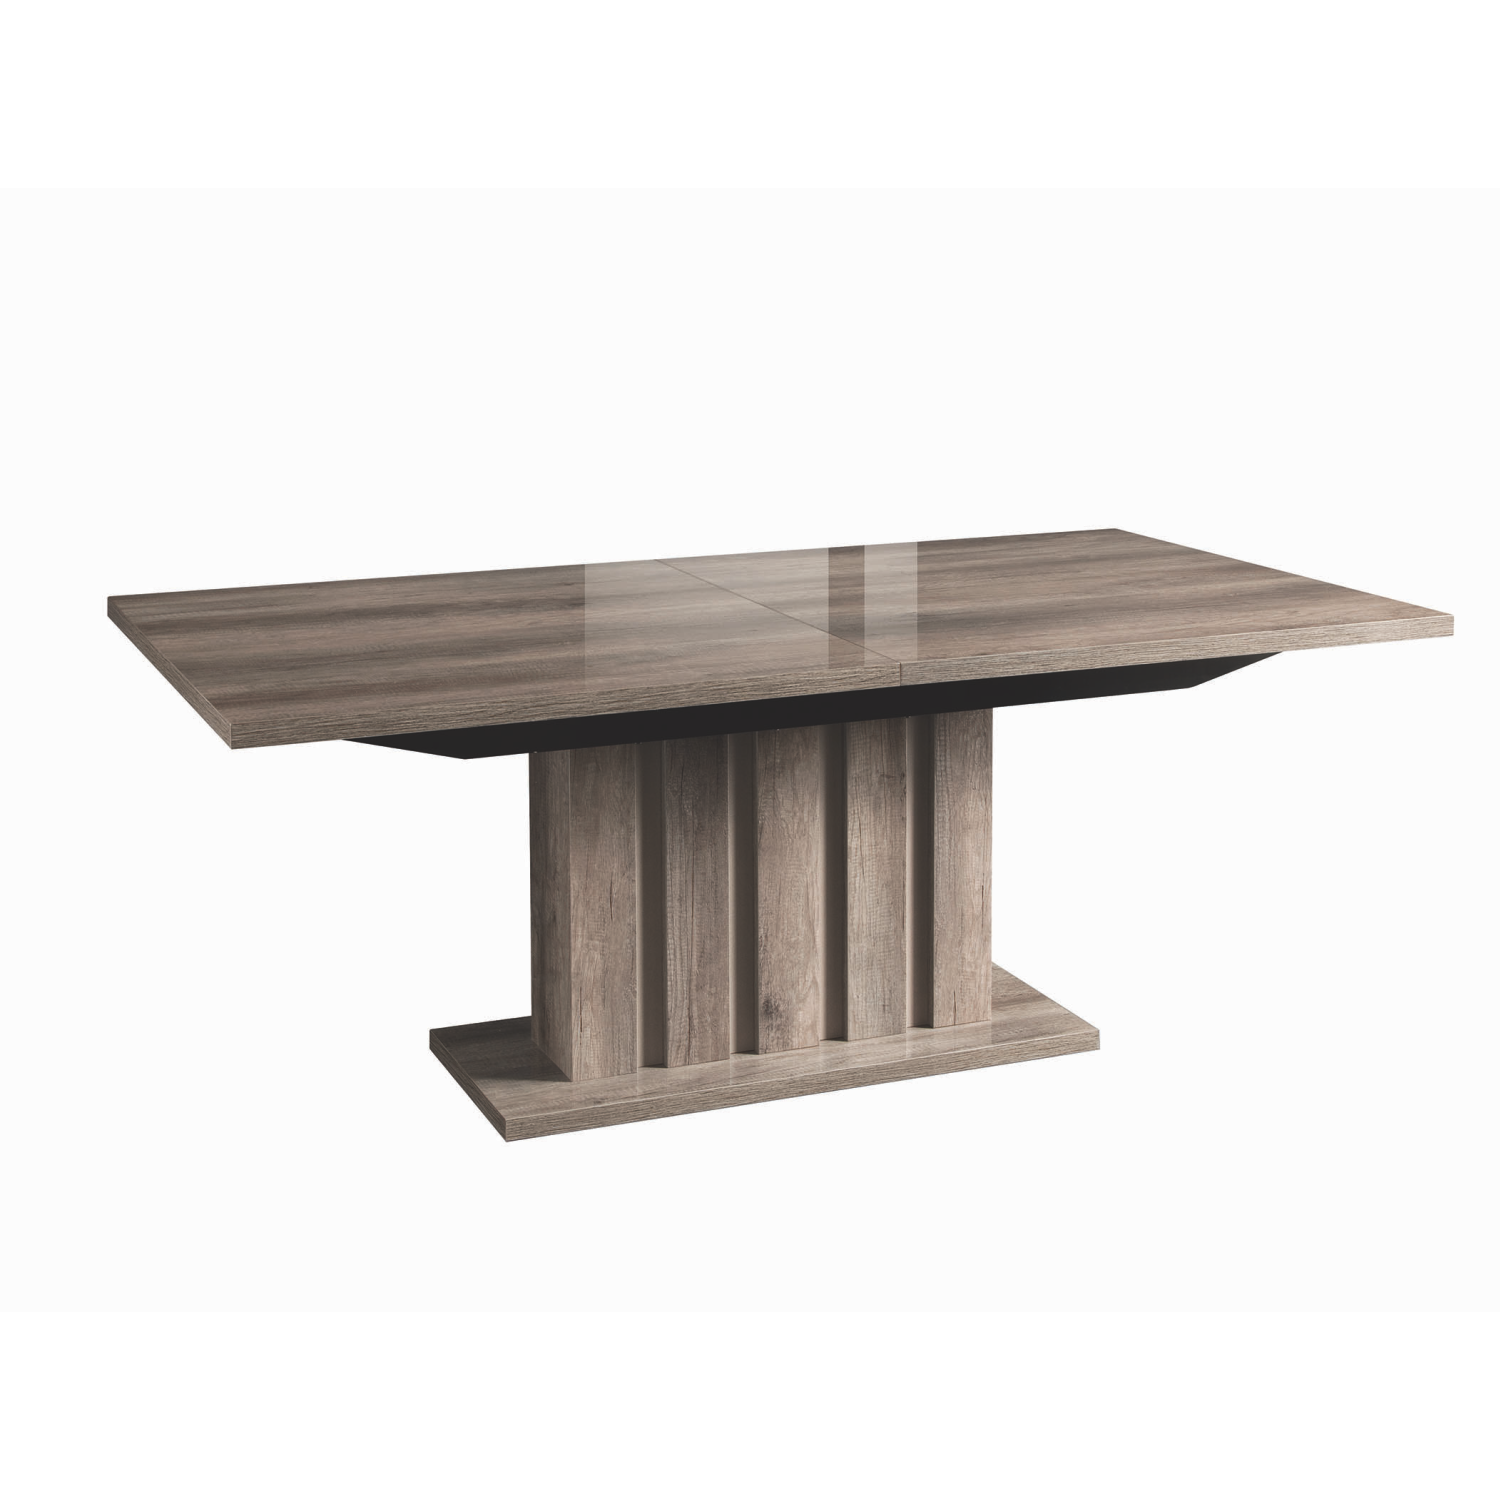 Matera Dining Table Image